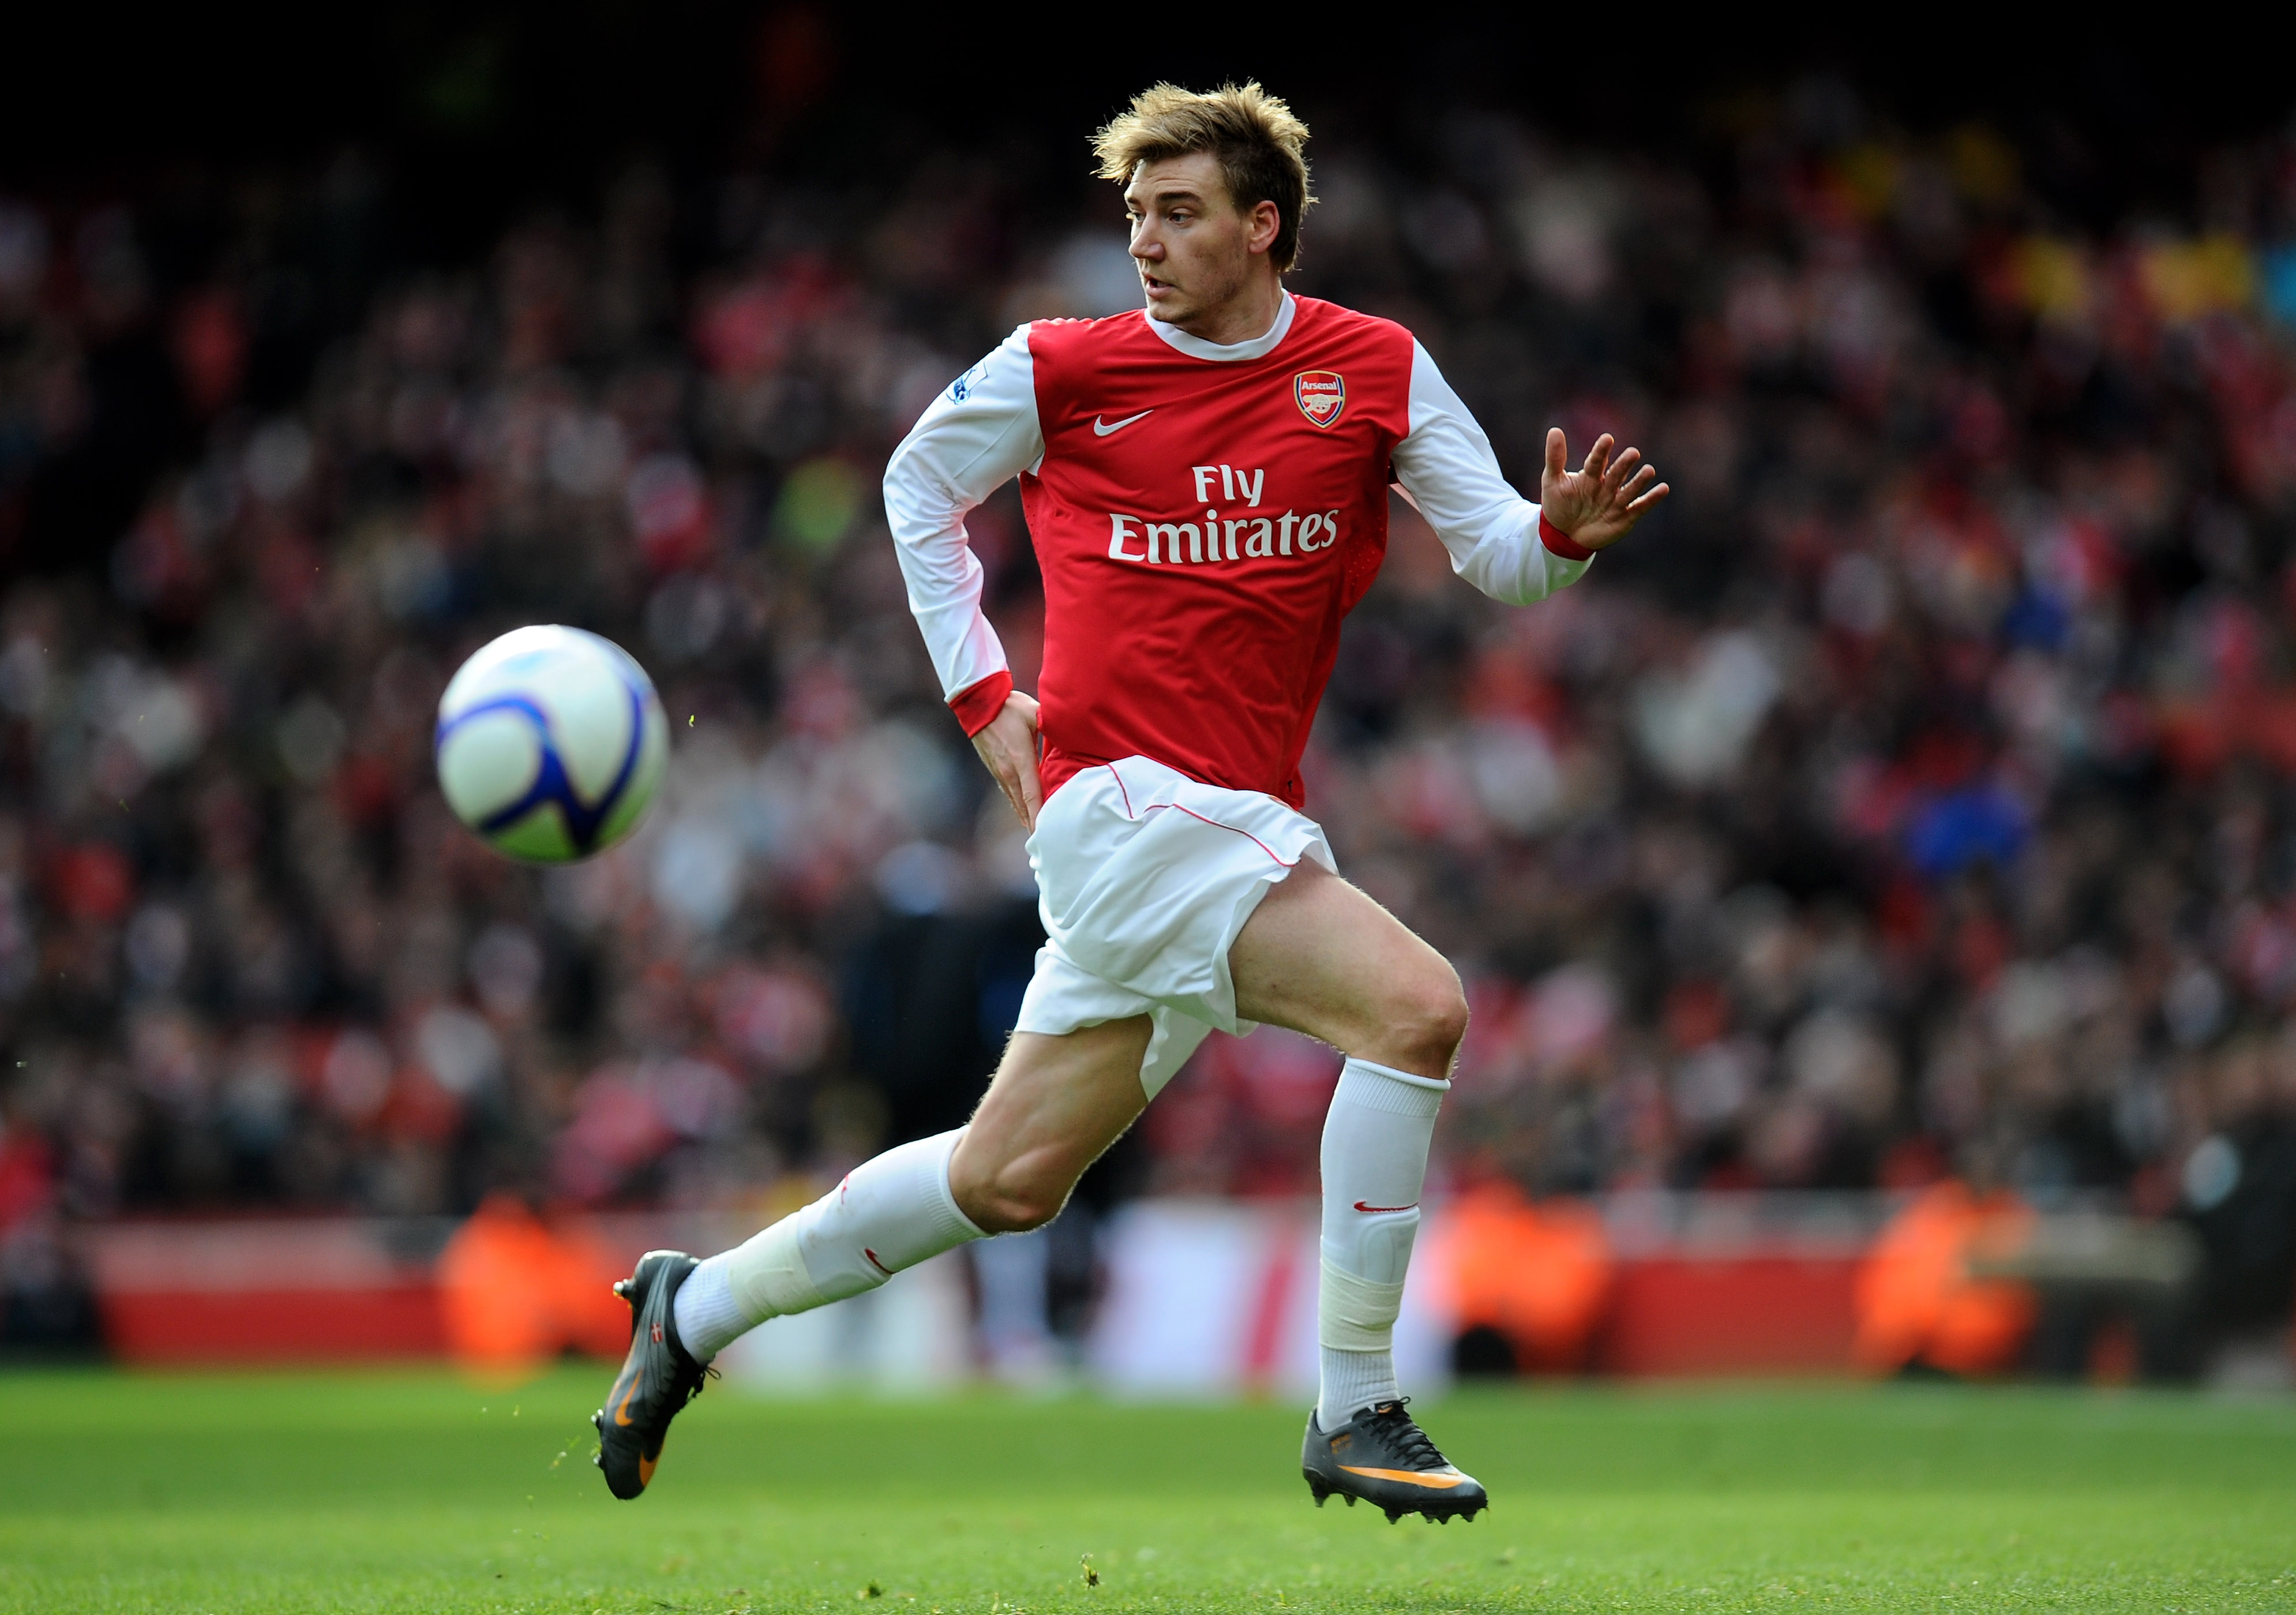 LONDON, ENGLAND - JANUARY 30:  Nicklas Bendtner of Arsenal runs with the ball during the FA Cup sponsored by E.ON fourth round match between Arsenal and Huddersfield Town at The Emirates Stadium on January 30, 2011 in London, England.  (Photo by Clive Mas